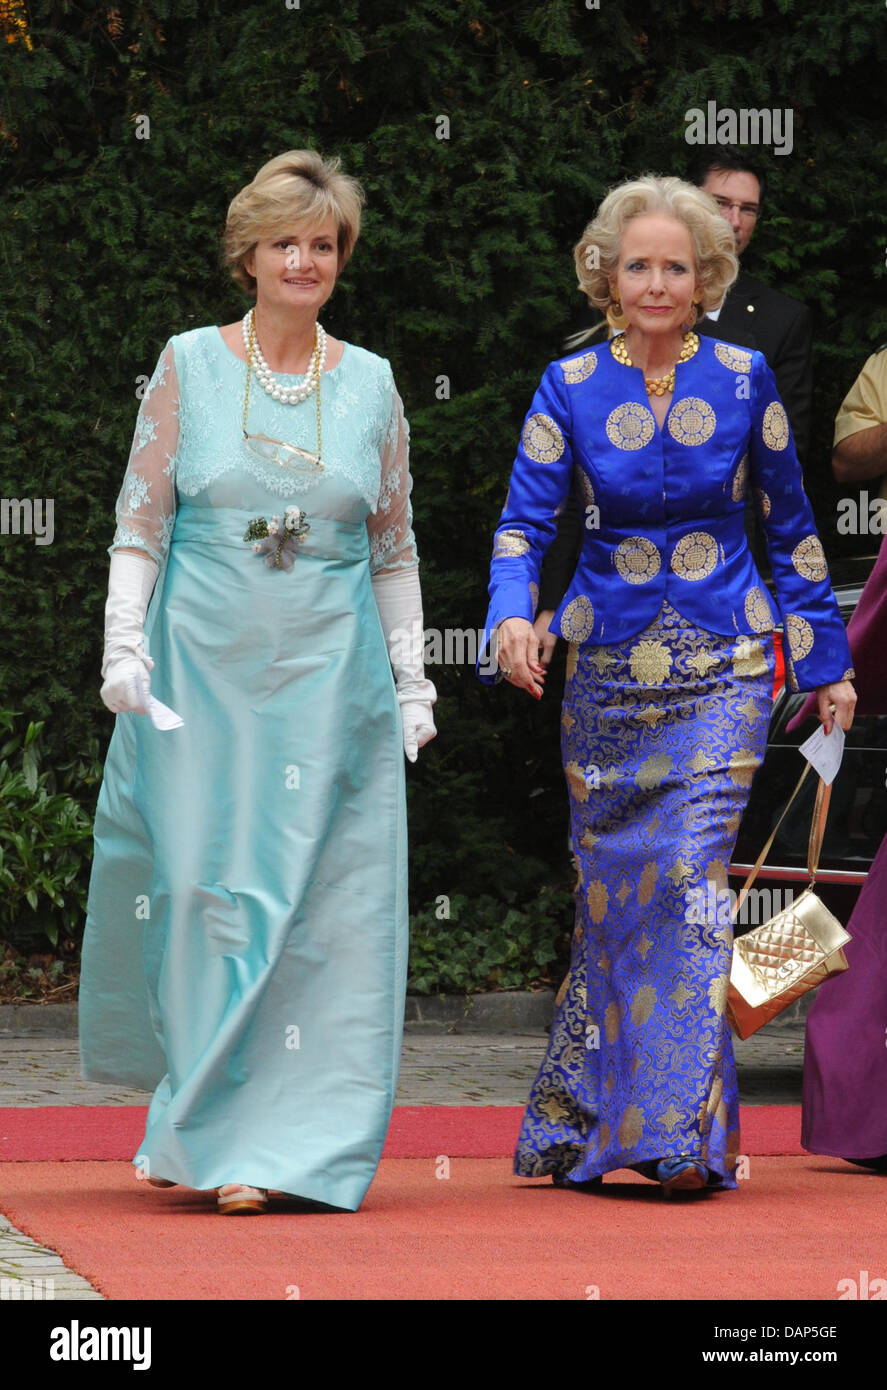 Princess Gloria von Thurn und Taxis (L) and Isa Countess of Hardenberg (C) arrive at the opening of the Bayreuth Festival 2011 in Bayreuth, Germany, 25 July 2011. The 100th festival opens with the opera 'Tannhaeuser'. The one-month festival is Germany's most prestigious culture event and devoted to operas by Richard Wagner. Photo: Ursula Düren dpa/lby Stock Photo